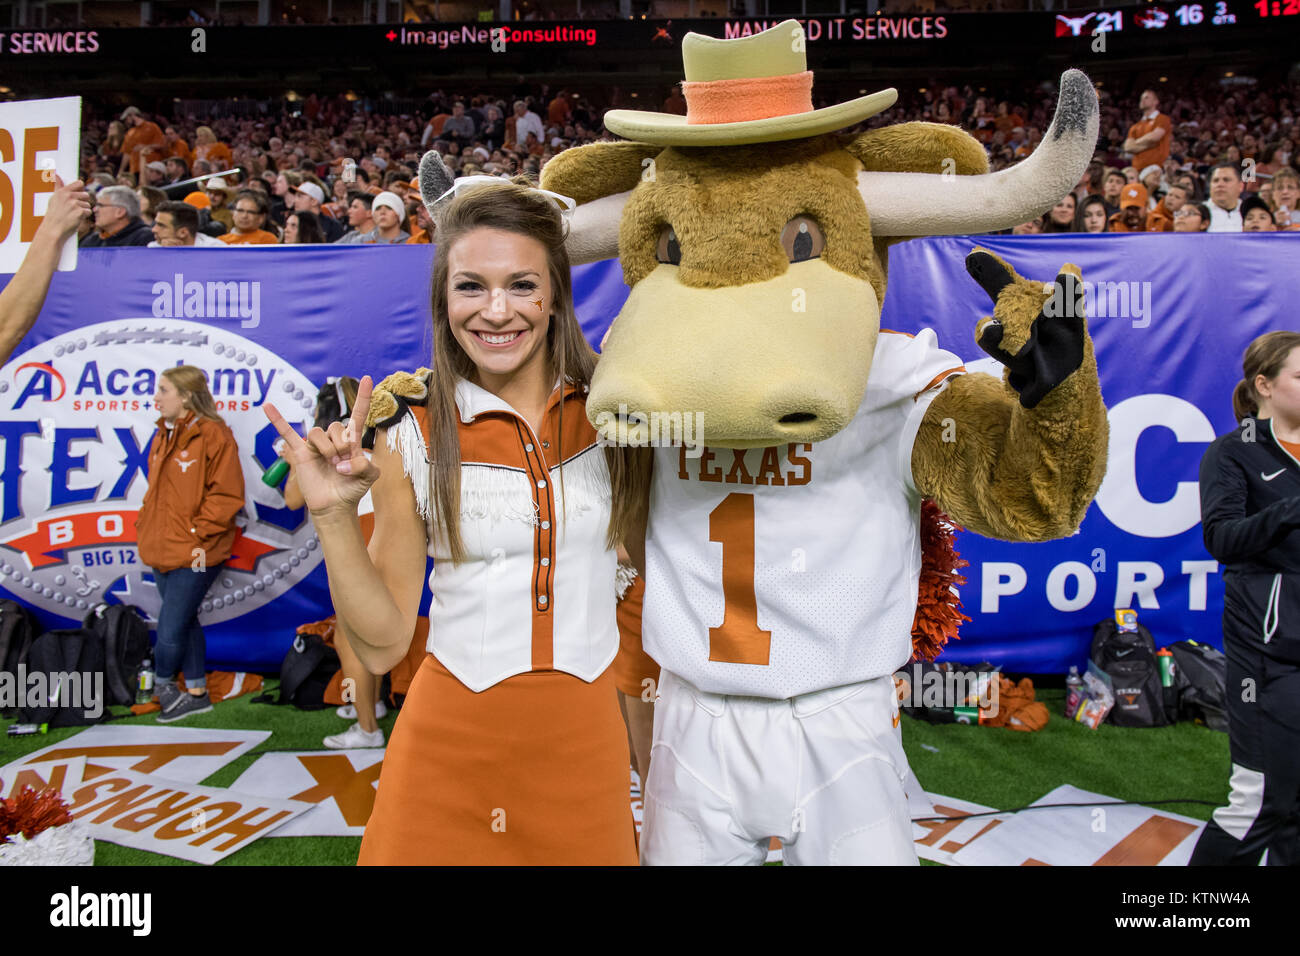 Houston, TX, USA. 27th Dec, 2017. Texas Longhorns mascot Hook 'Em stands with a cheerleader during the 3rd quarter of the Texas Bowl NCAA football game between the Texas Longhorns and the Missouri Tigers at NRG Stadium in Houston, TX. Texas won the game 33 to 16.Trask Smith/CSM/Alamy Live News Stock Photo